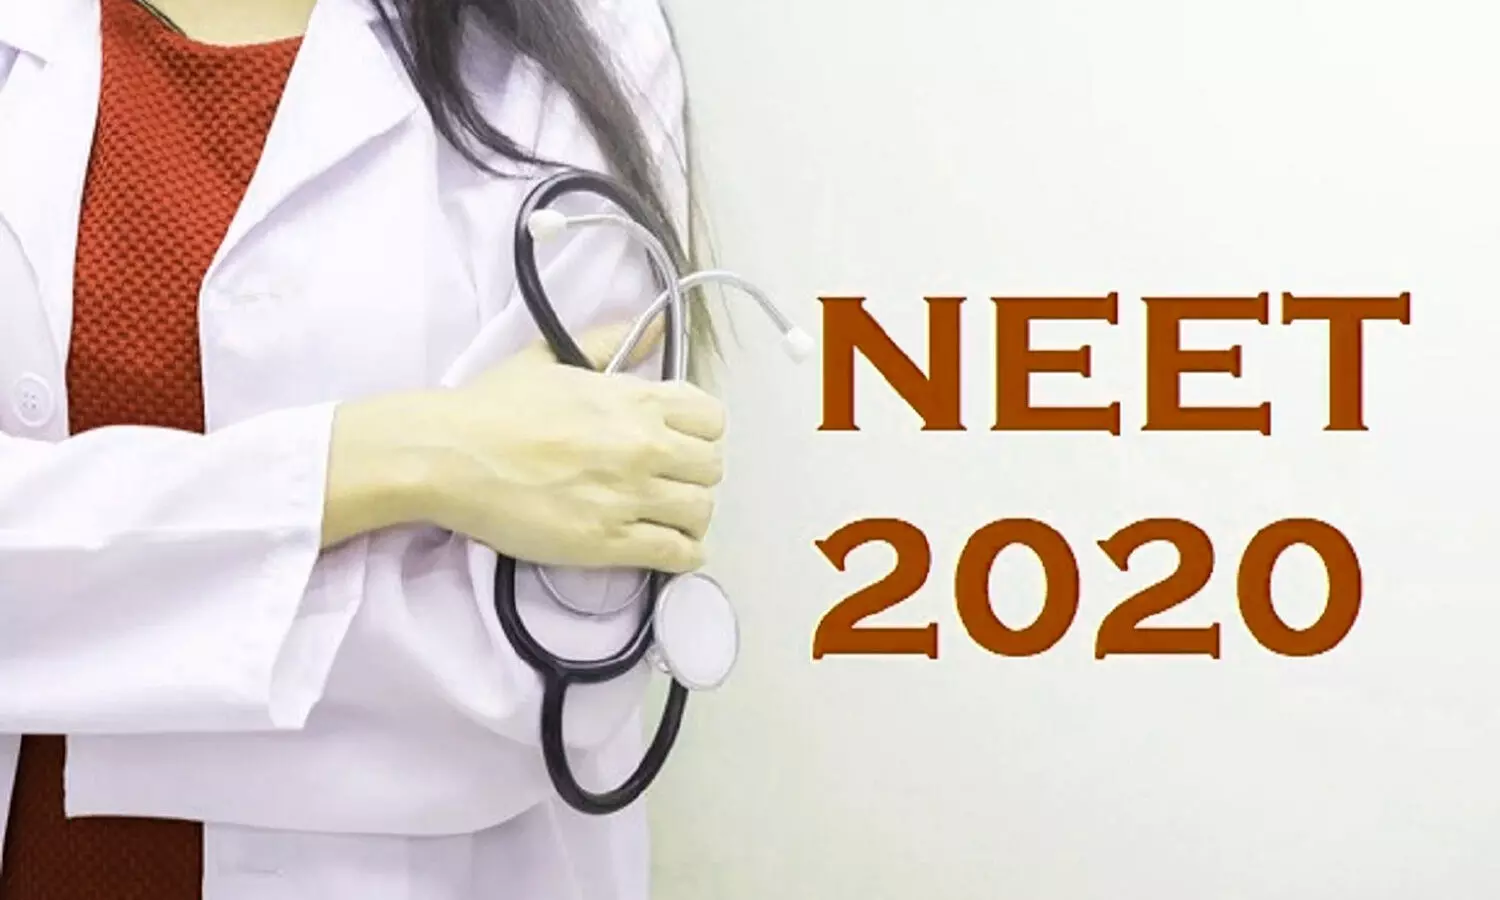 NEET 2020: NTA extends correction facility, specifies on Candidates Photographs, Signature, Thumb Impression in application forms